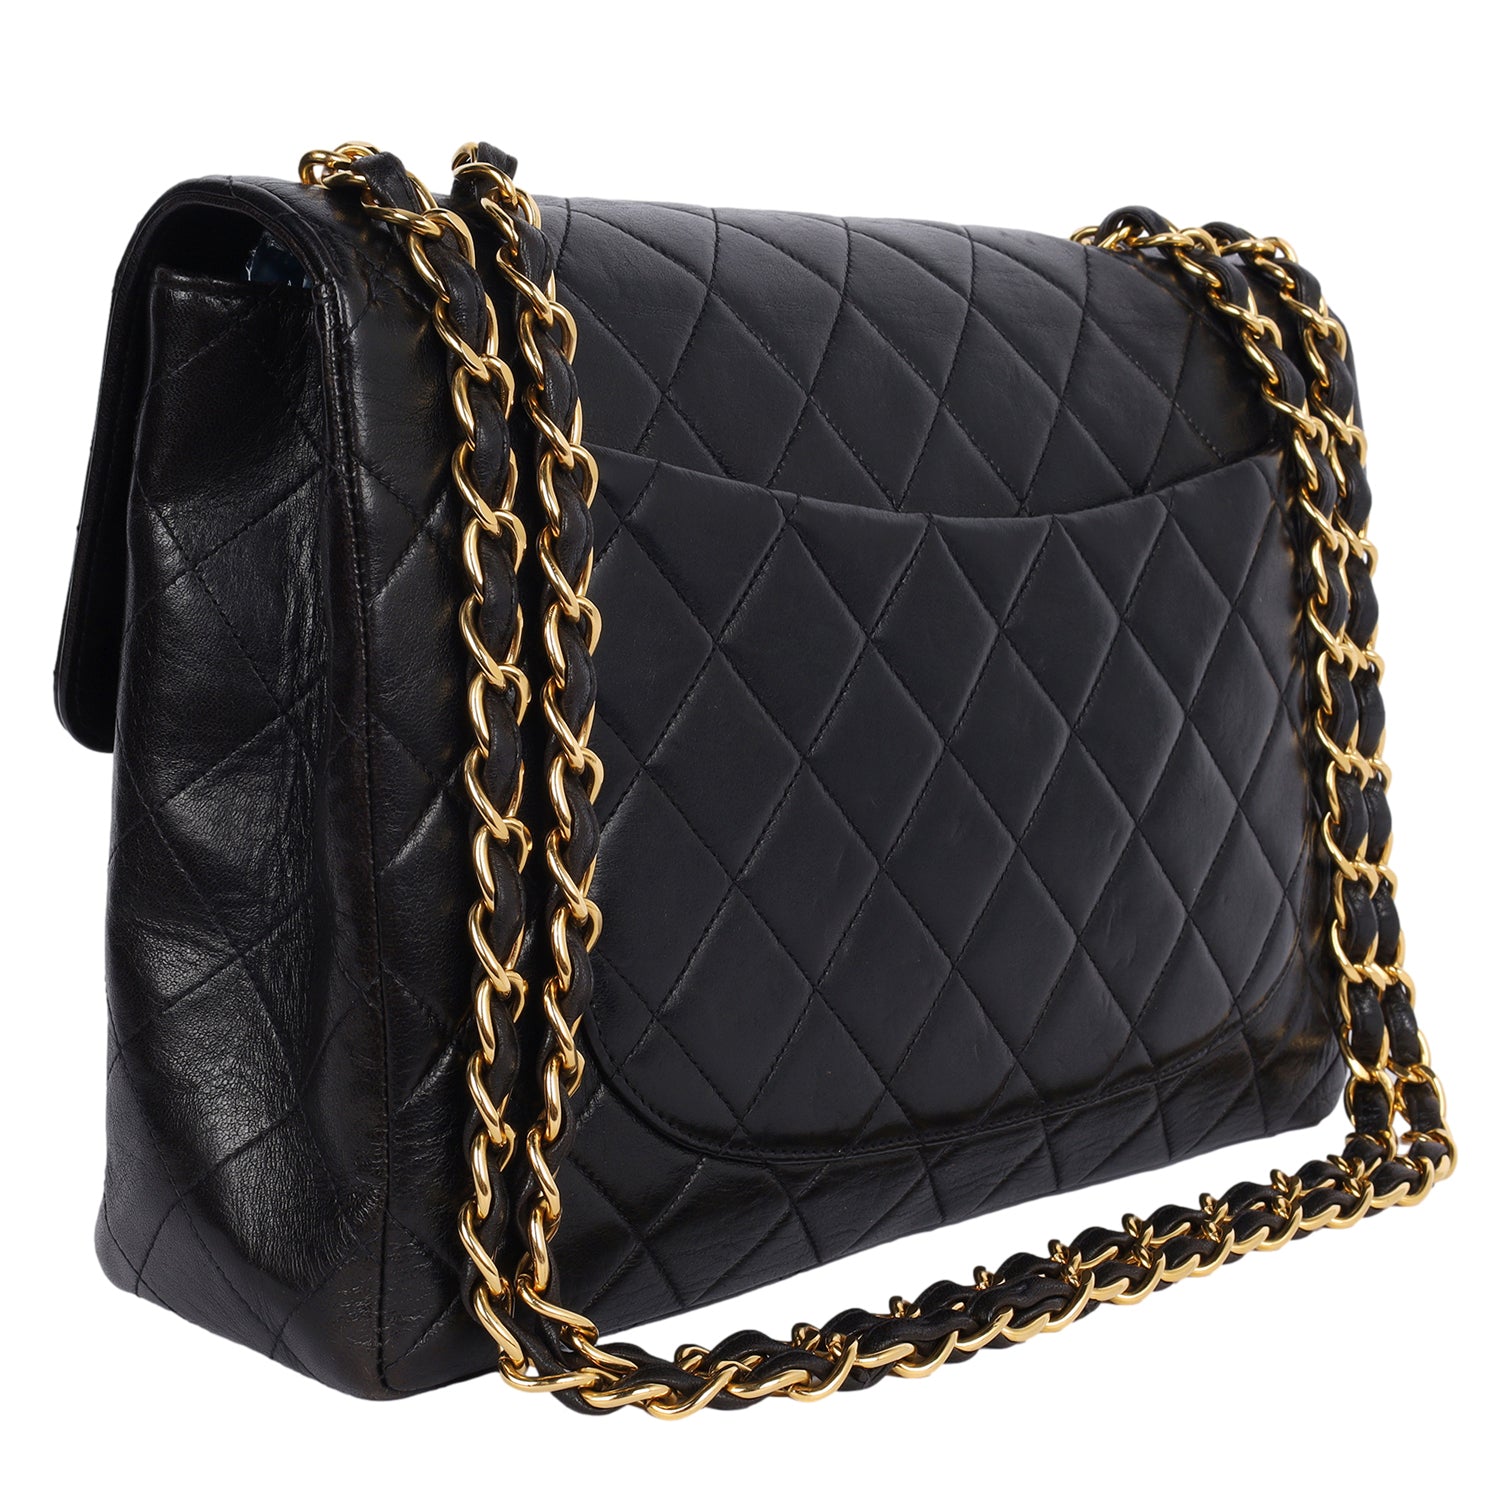 Chanel Quilted Flap Bag, Black  Costco - 北美省钱快报折扣爆料